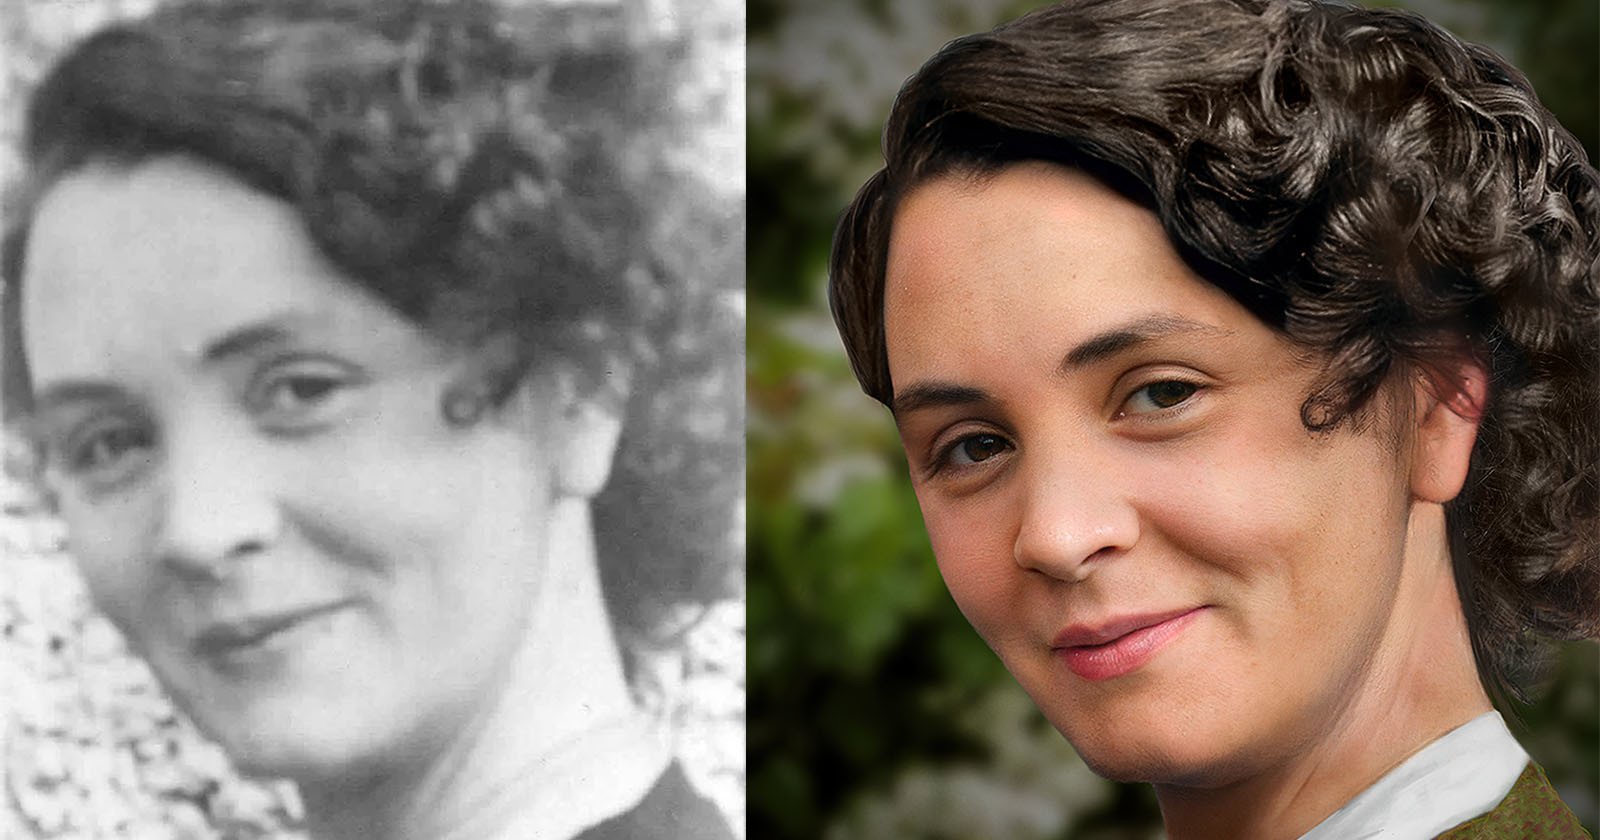 Artist Transforms 50-Year-Old Photo Into a Beautiful Modern Portrait